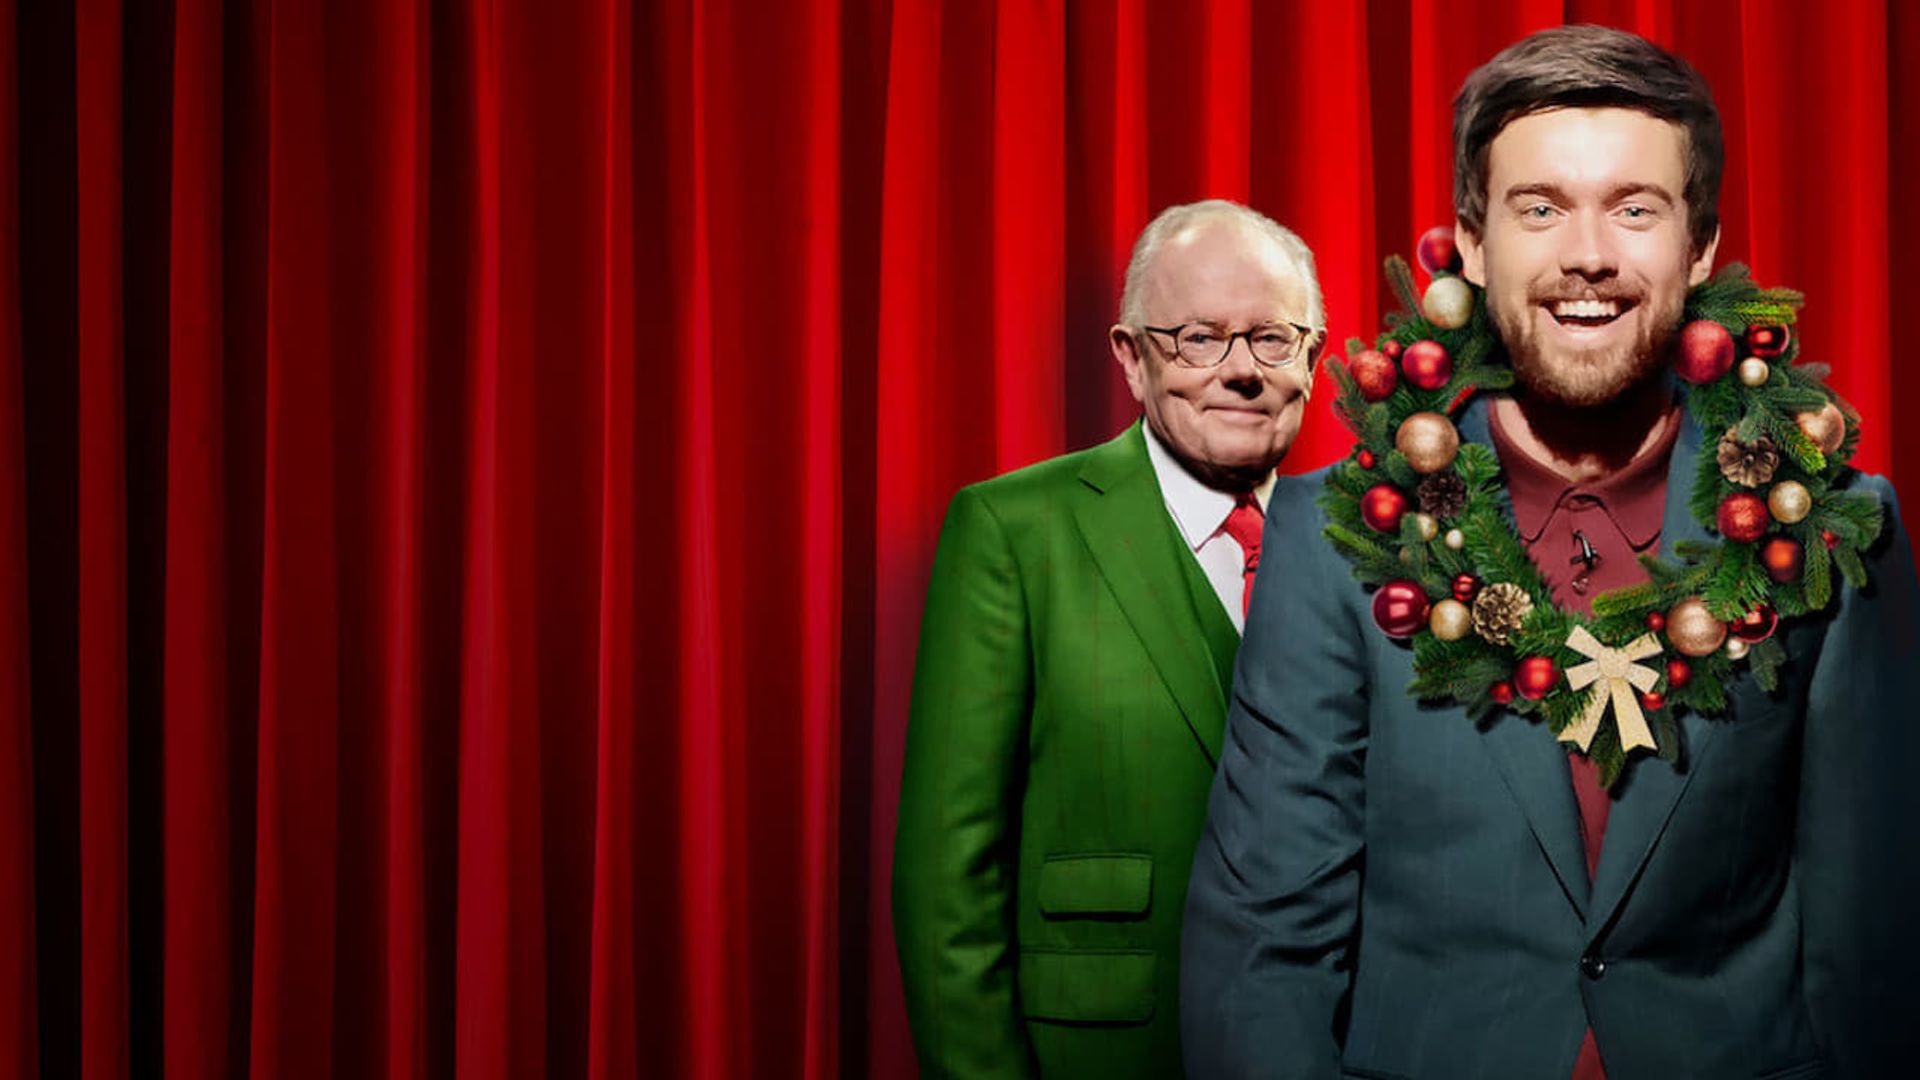 Jack Whitehall: Christmas with My Father background